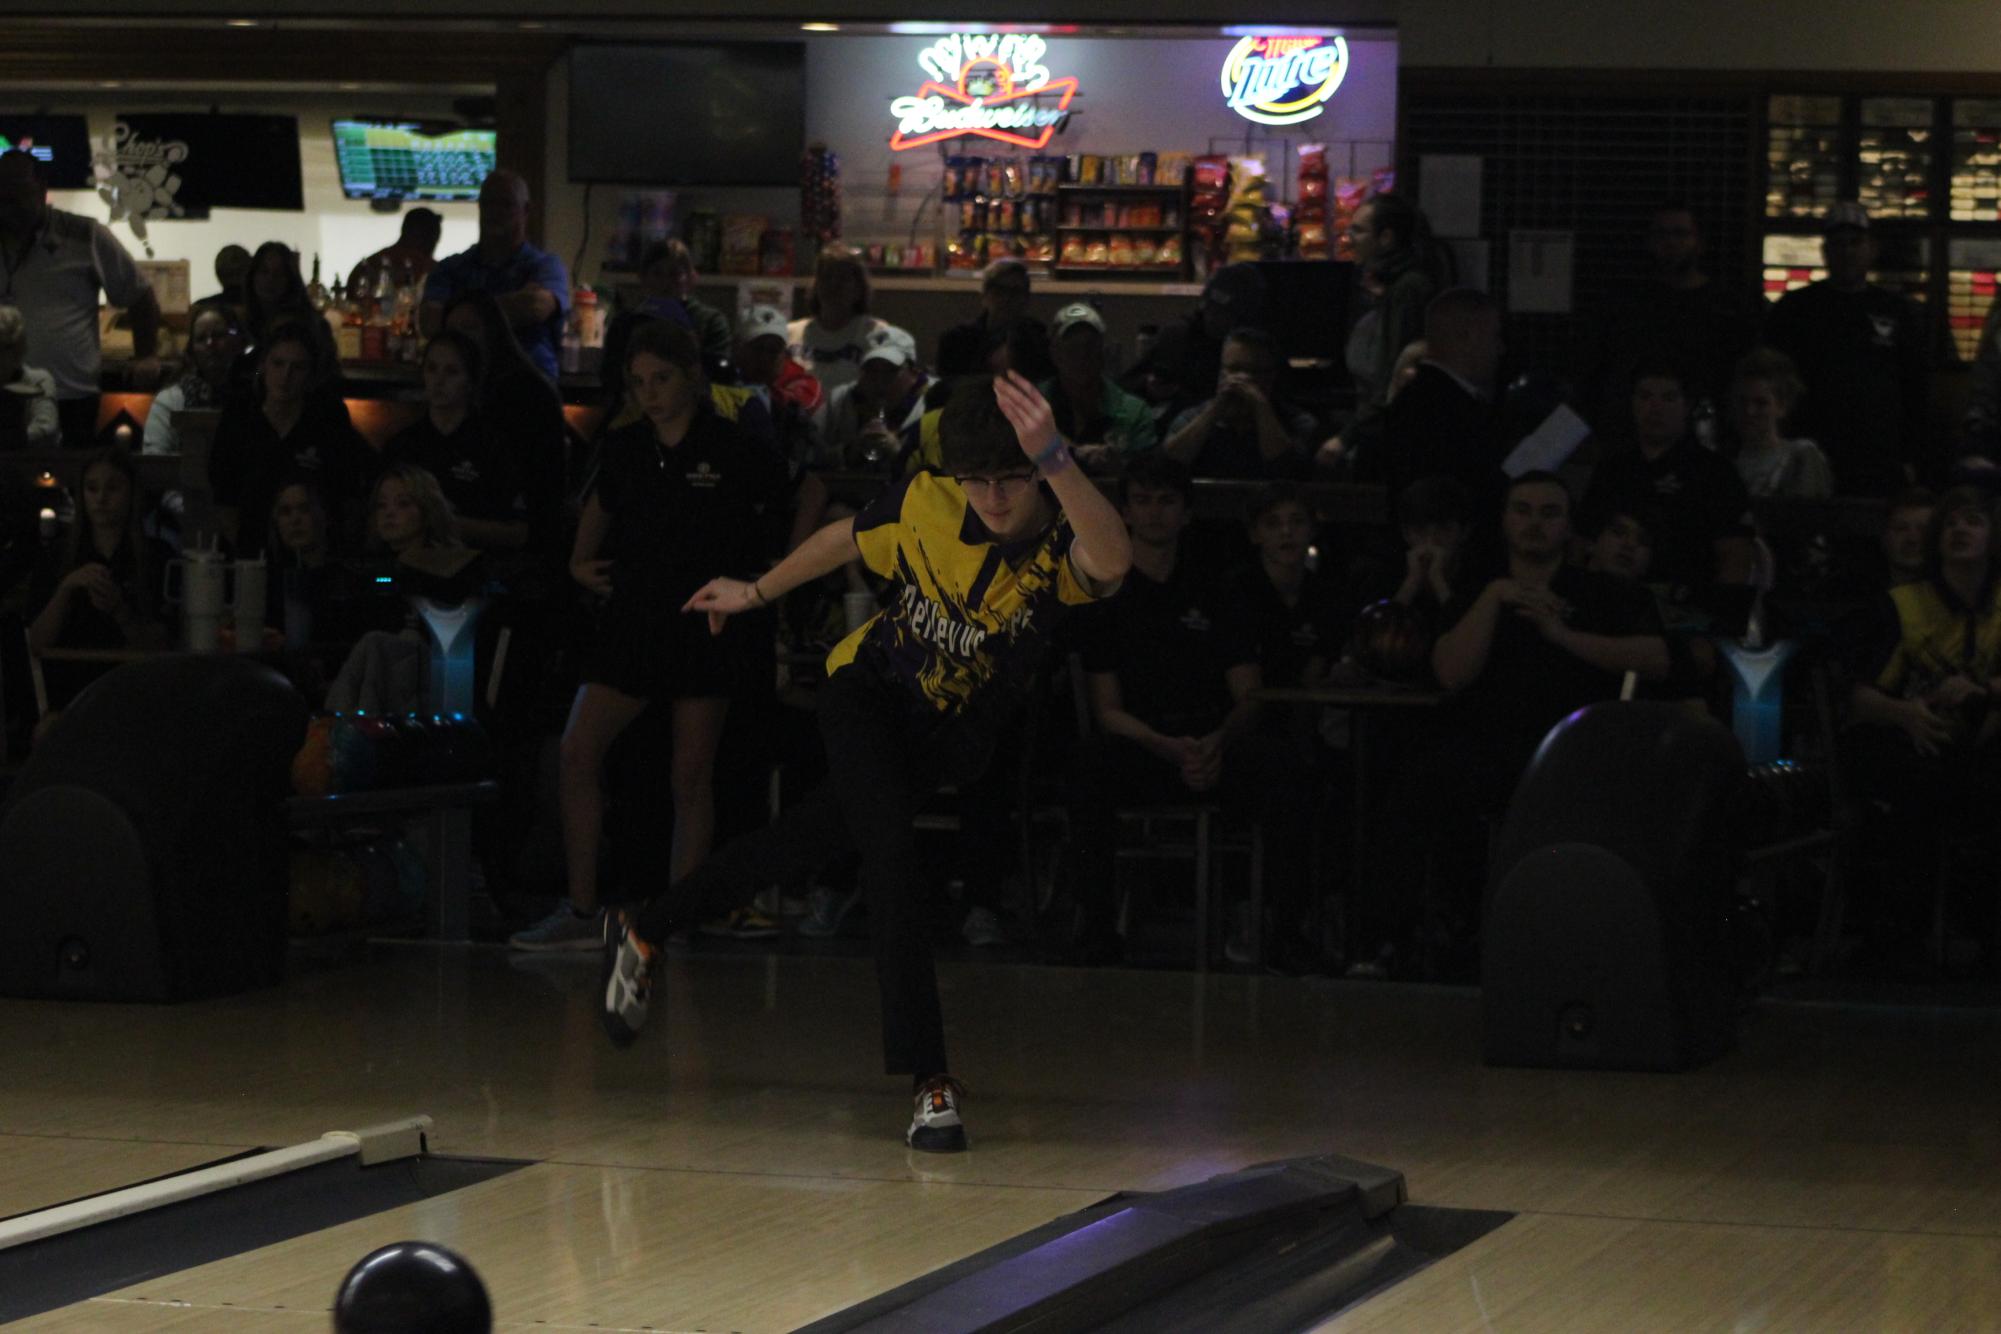 Senior Nate Centineo, during his bowling career at Bellevue West, bowled a perfect game and qualified for state all four years.